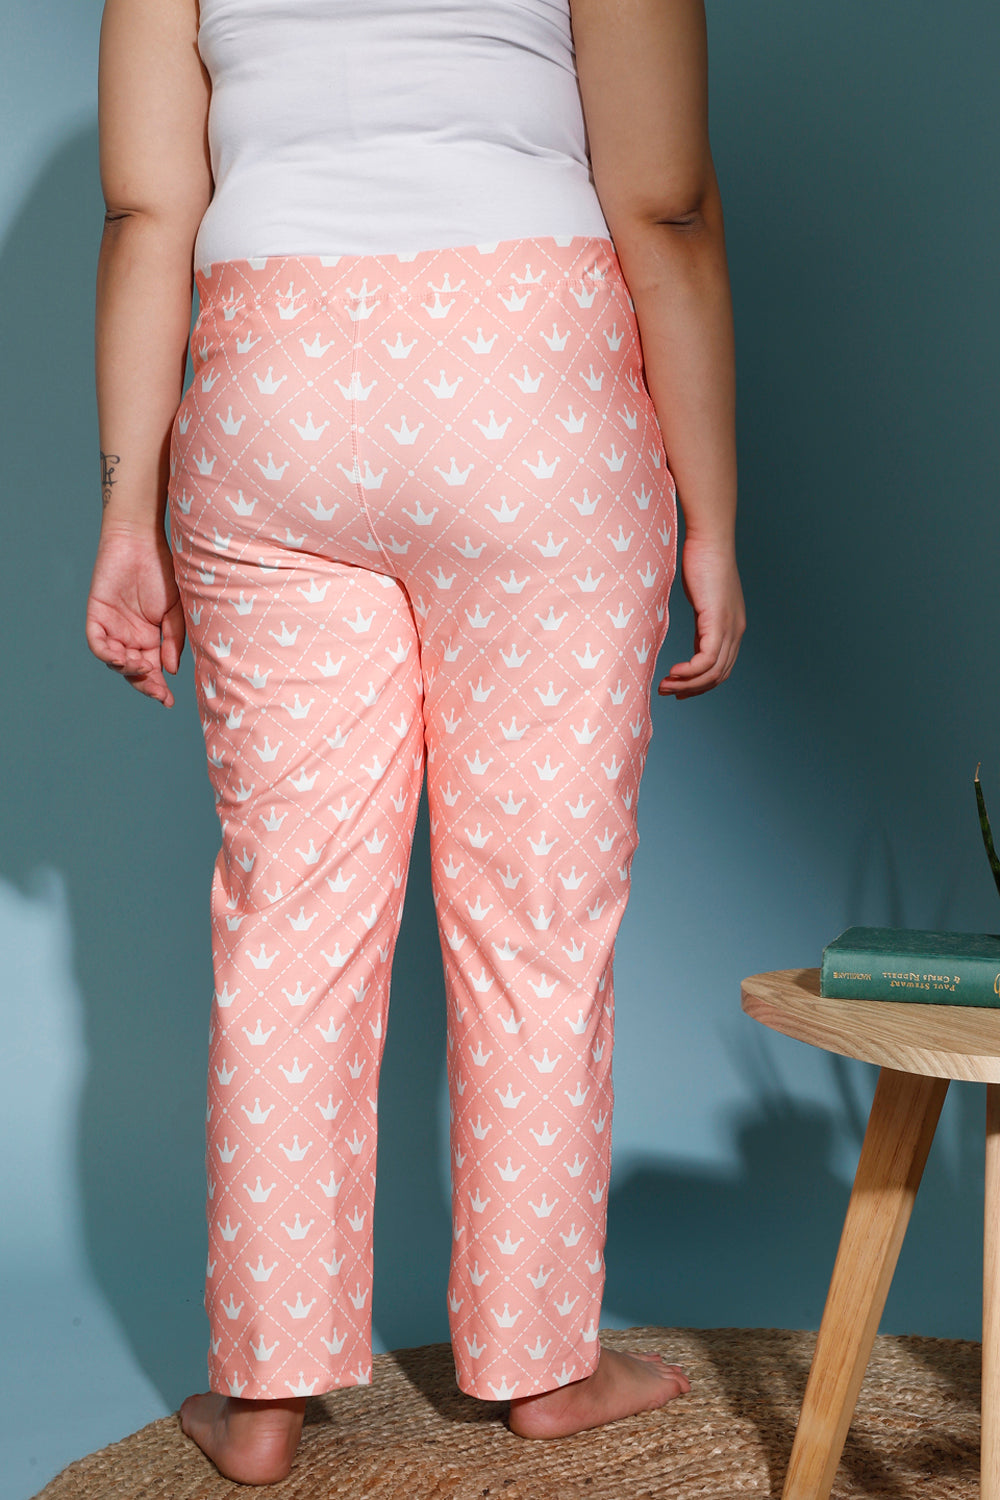 Crown Printed Lounge Pants for Women